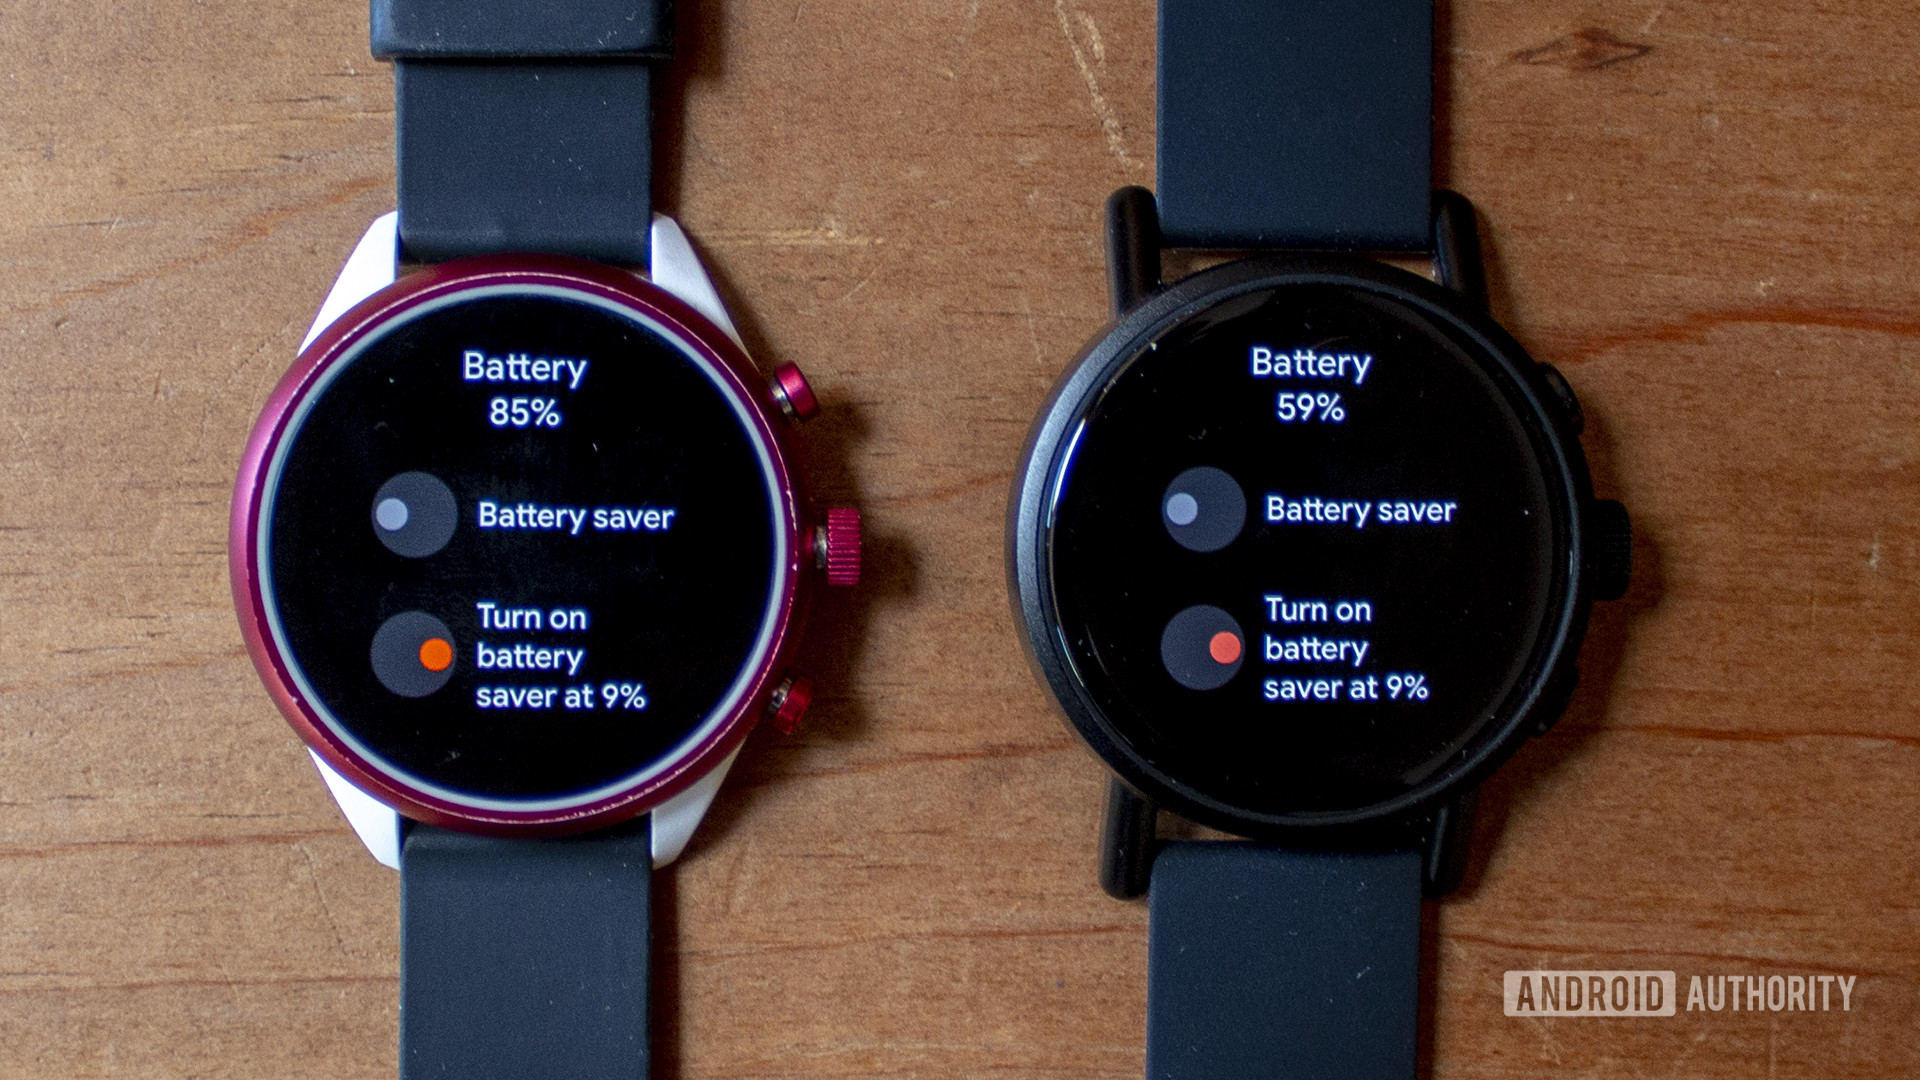 Misfit Vapor X Smartwatch Right next to Fossil Sport Left both showing battery options